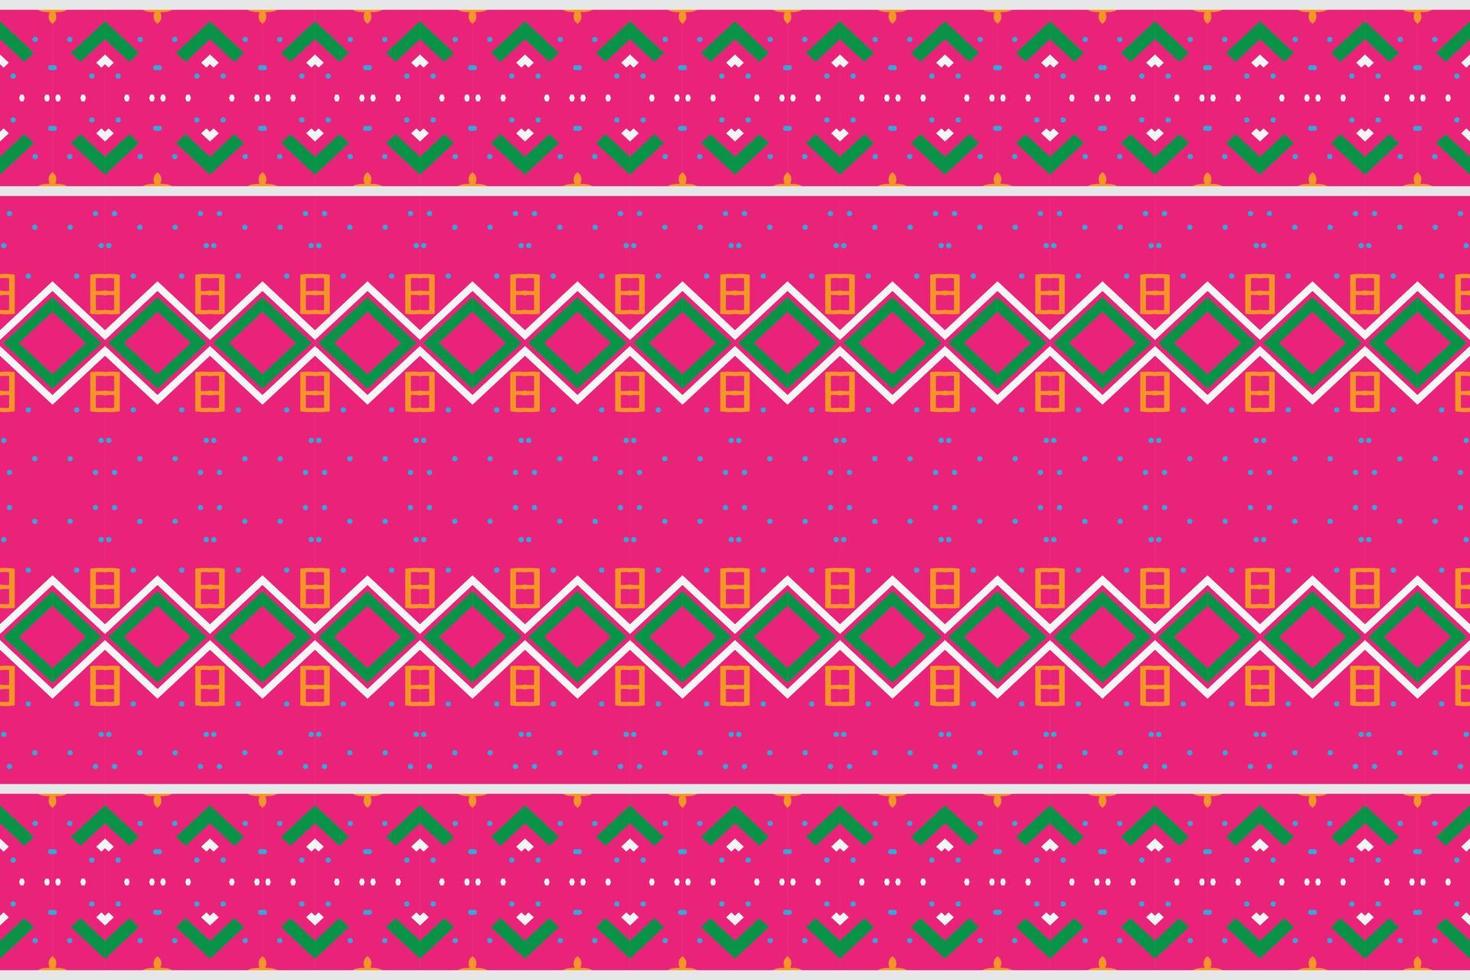 Samoan tribal pattern design. Geometric ethnic pattern traditional Design It is a pattern geometric shapes. Create beautiful fabric patterns. Design for print. Using in the fashion industry. vector